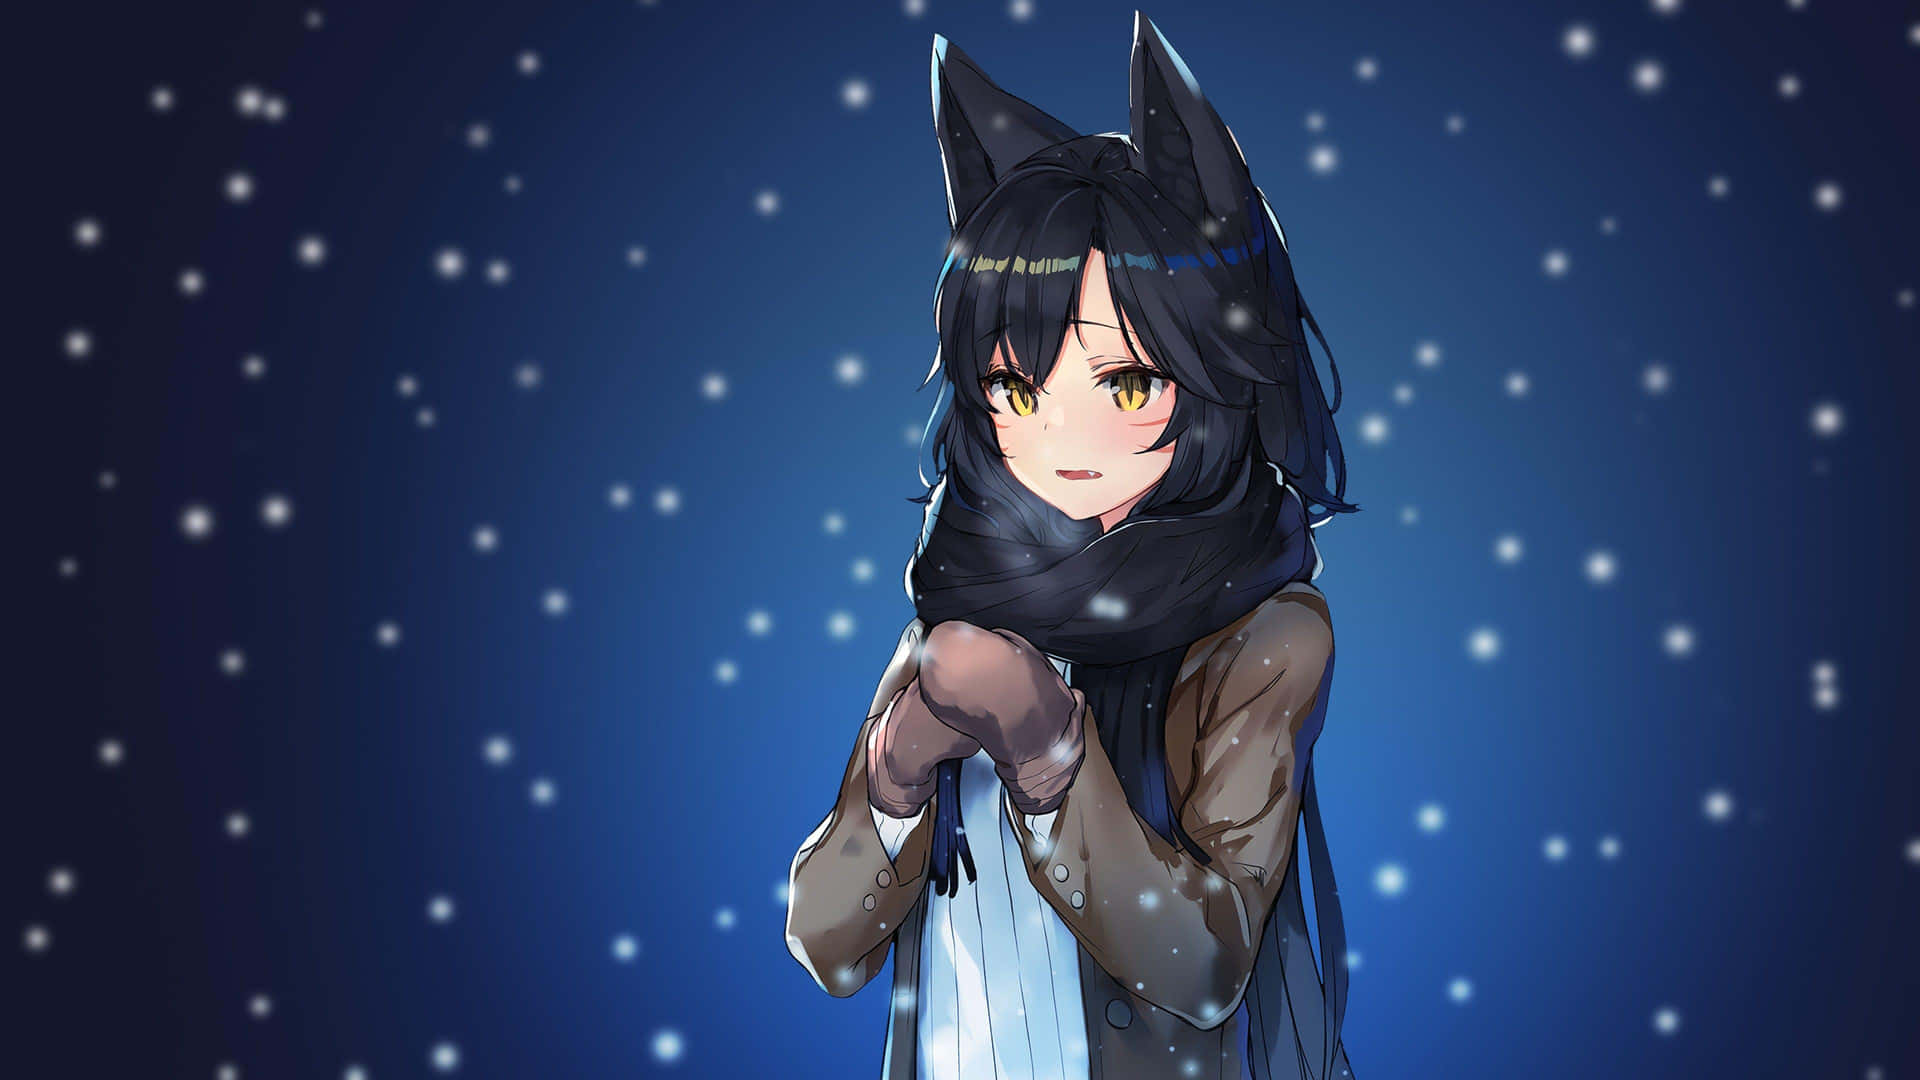 Cute Anime Wolf Girl In The Snow Wallpaper